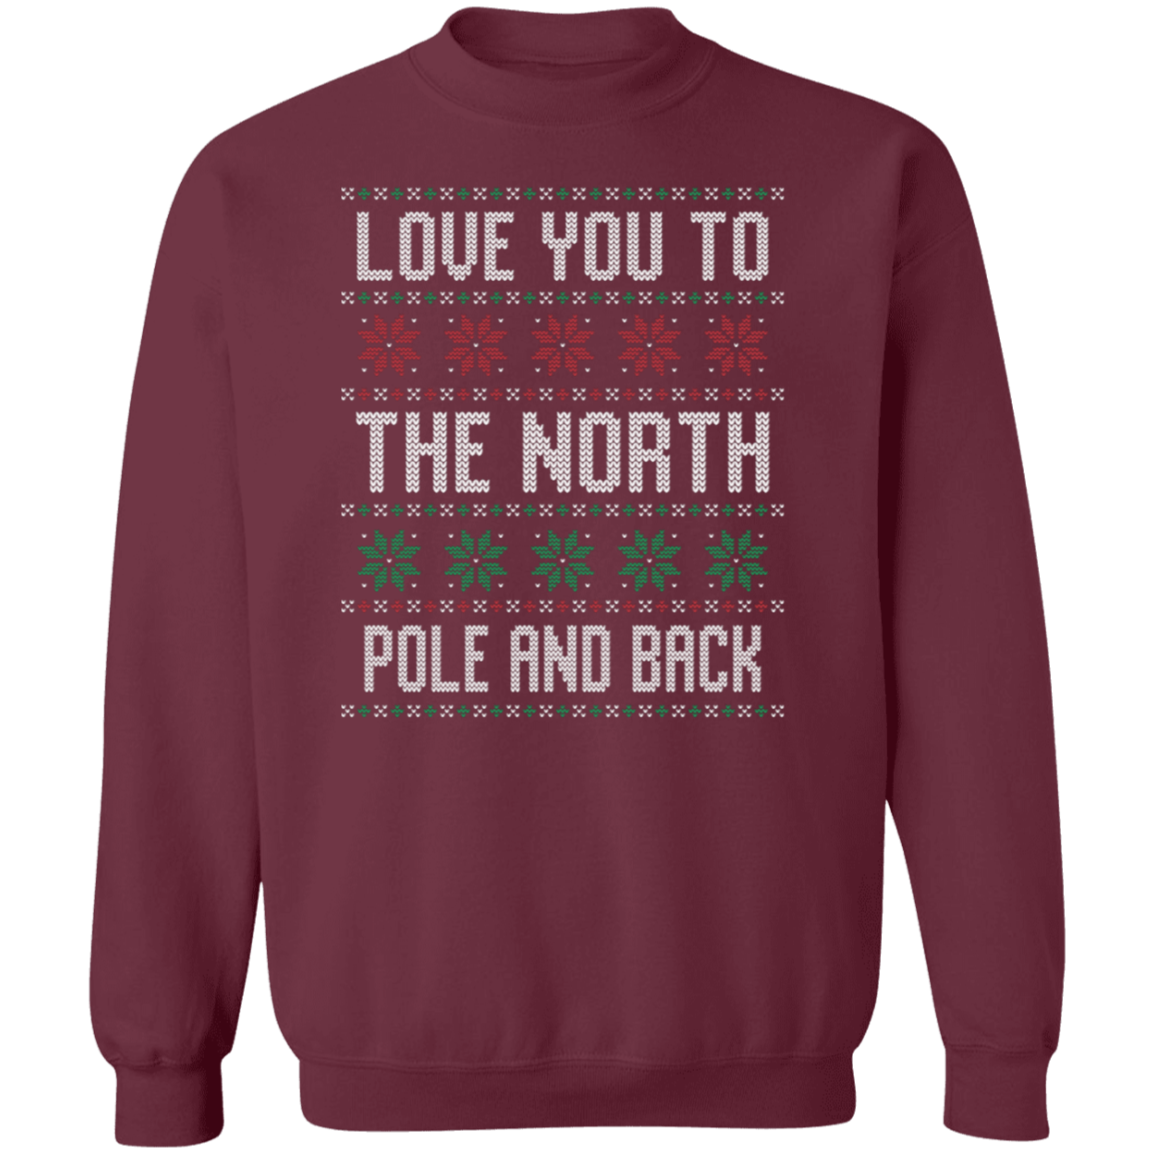 Love You To The North Pole And Back - Unisex Ugly Sweater, Christmas, Winter, Fall